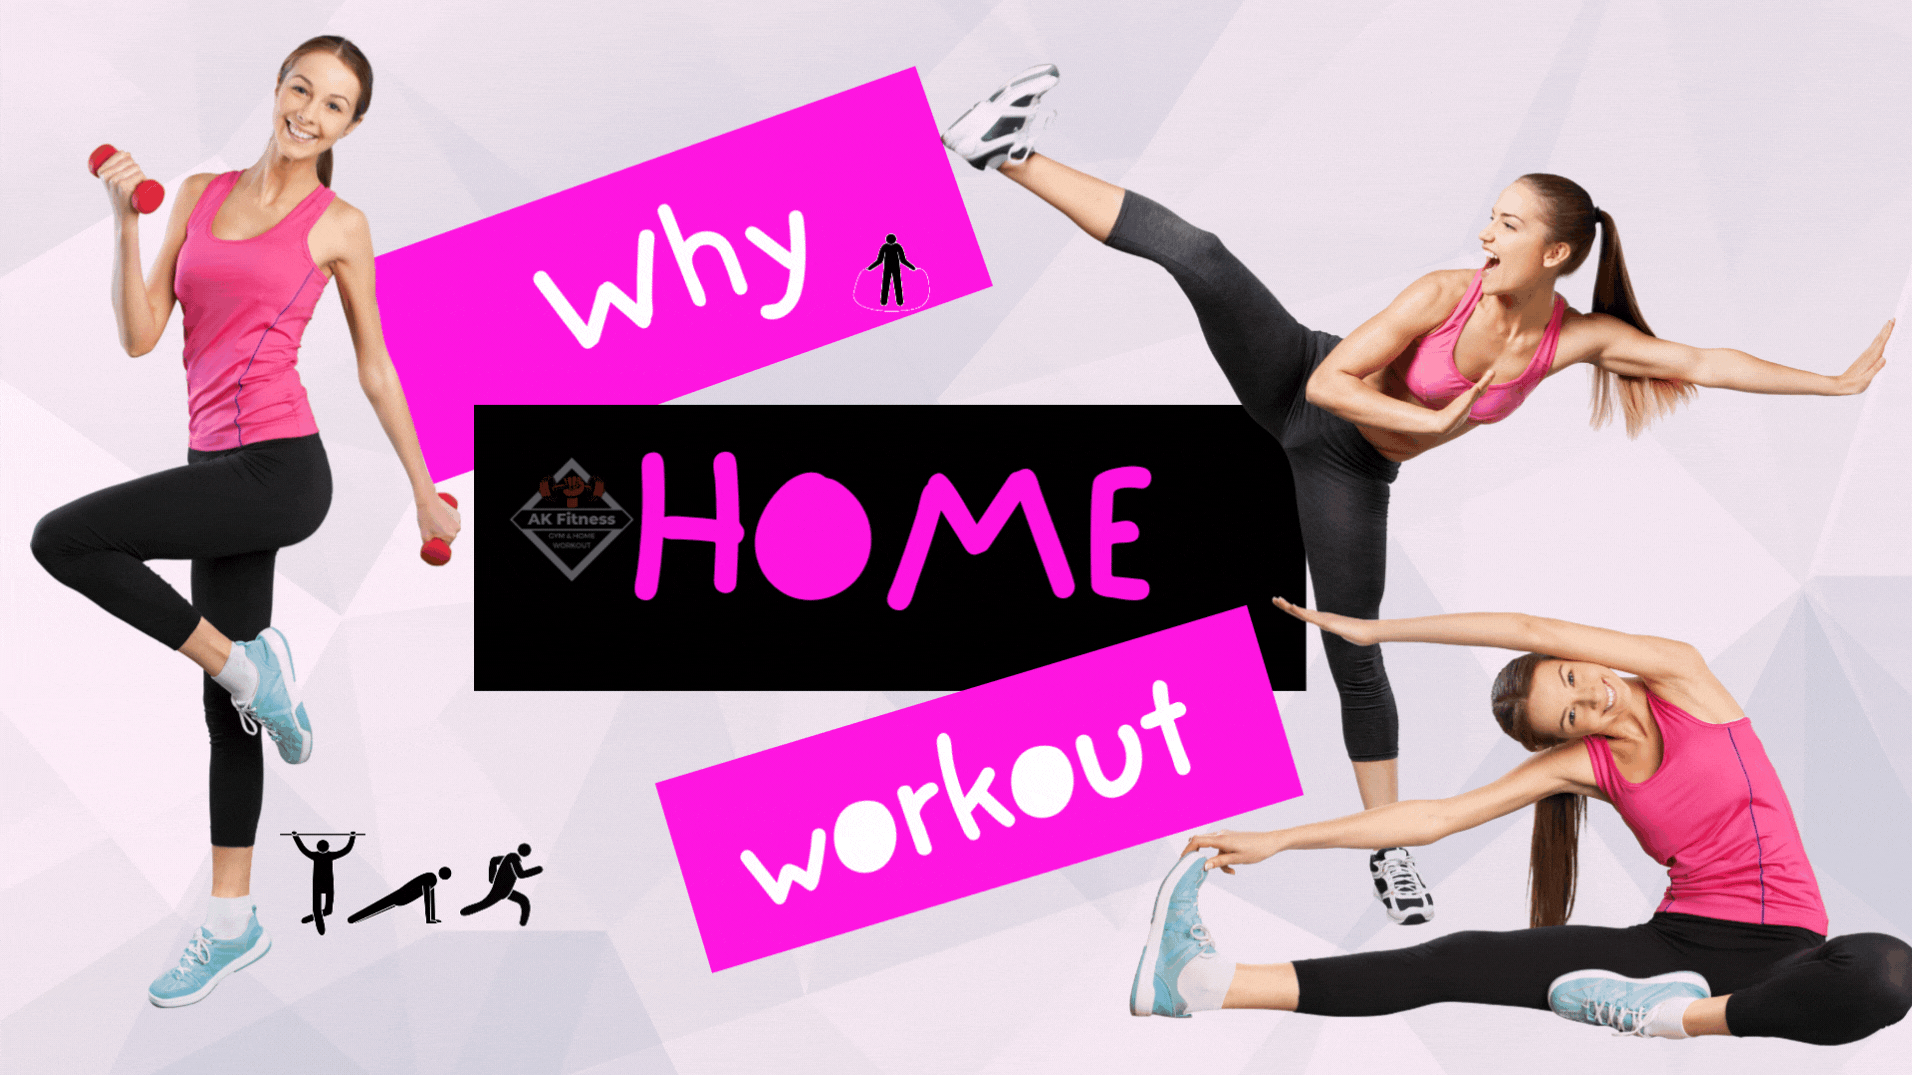 Home workouts